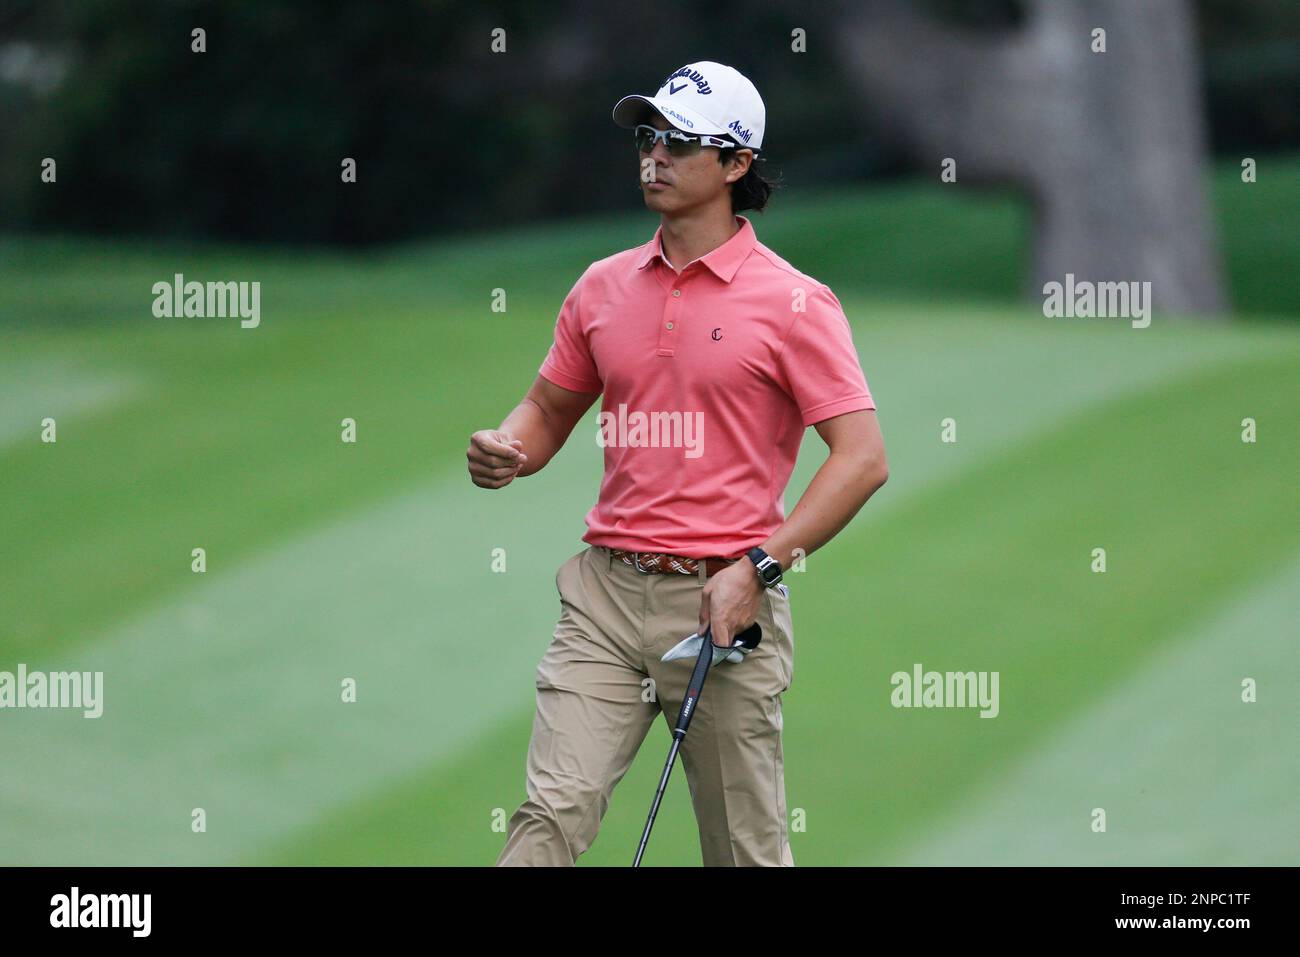 Ryo Ishikawa of Japan, in actions during the second round of the Zozo Championship golf tournament Friday, Oct